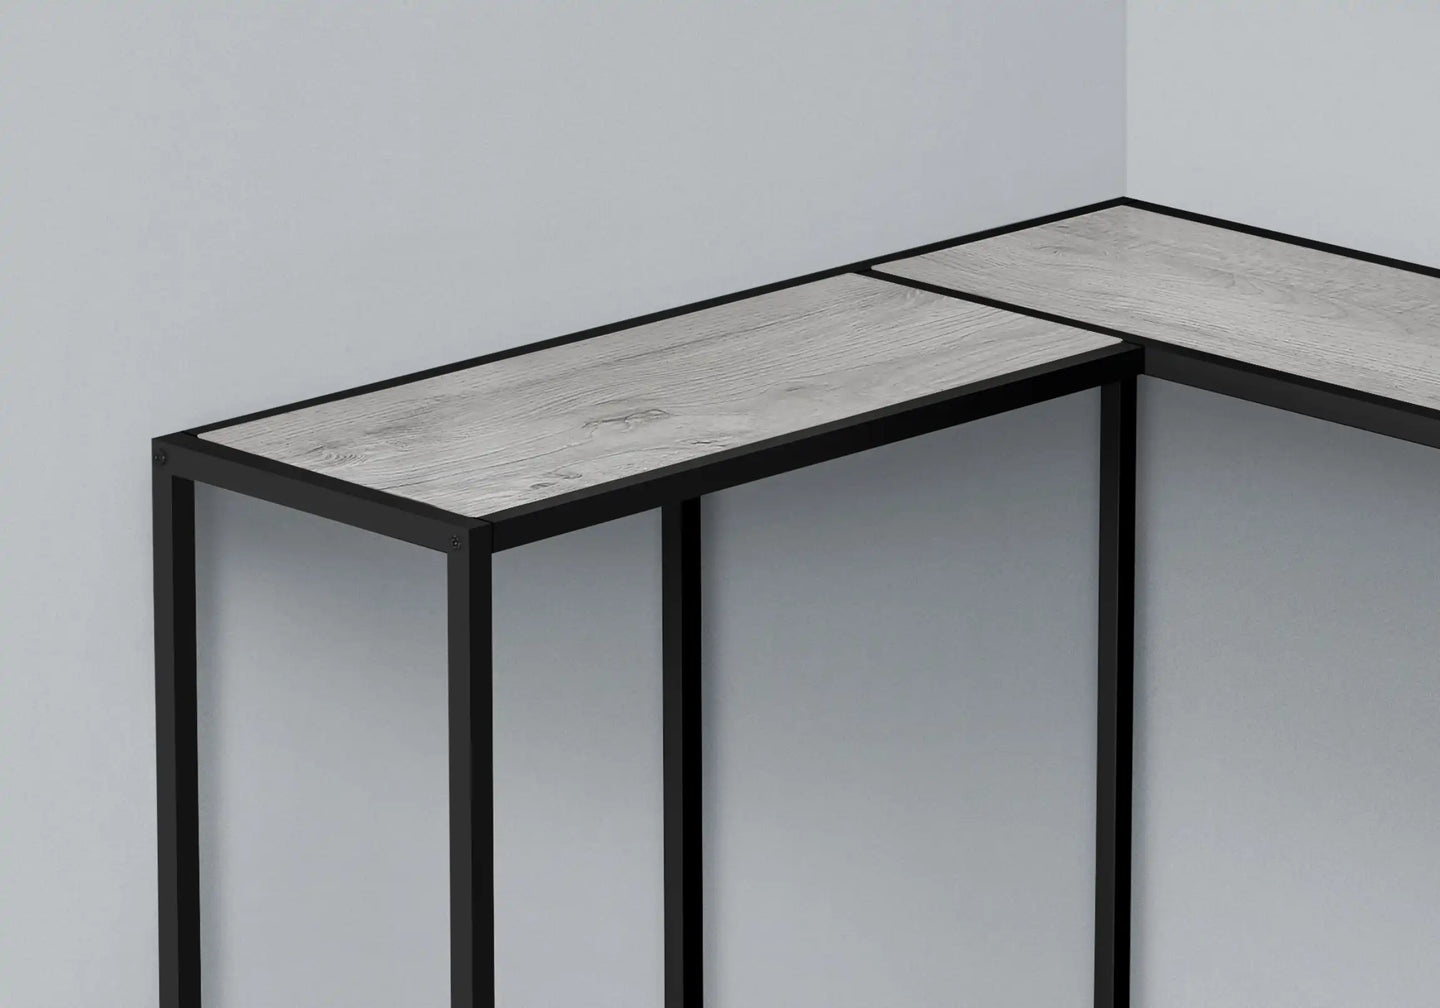 Grey Accent Table / Console Table - I 2156